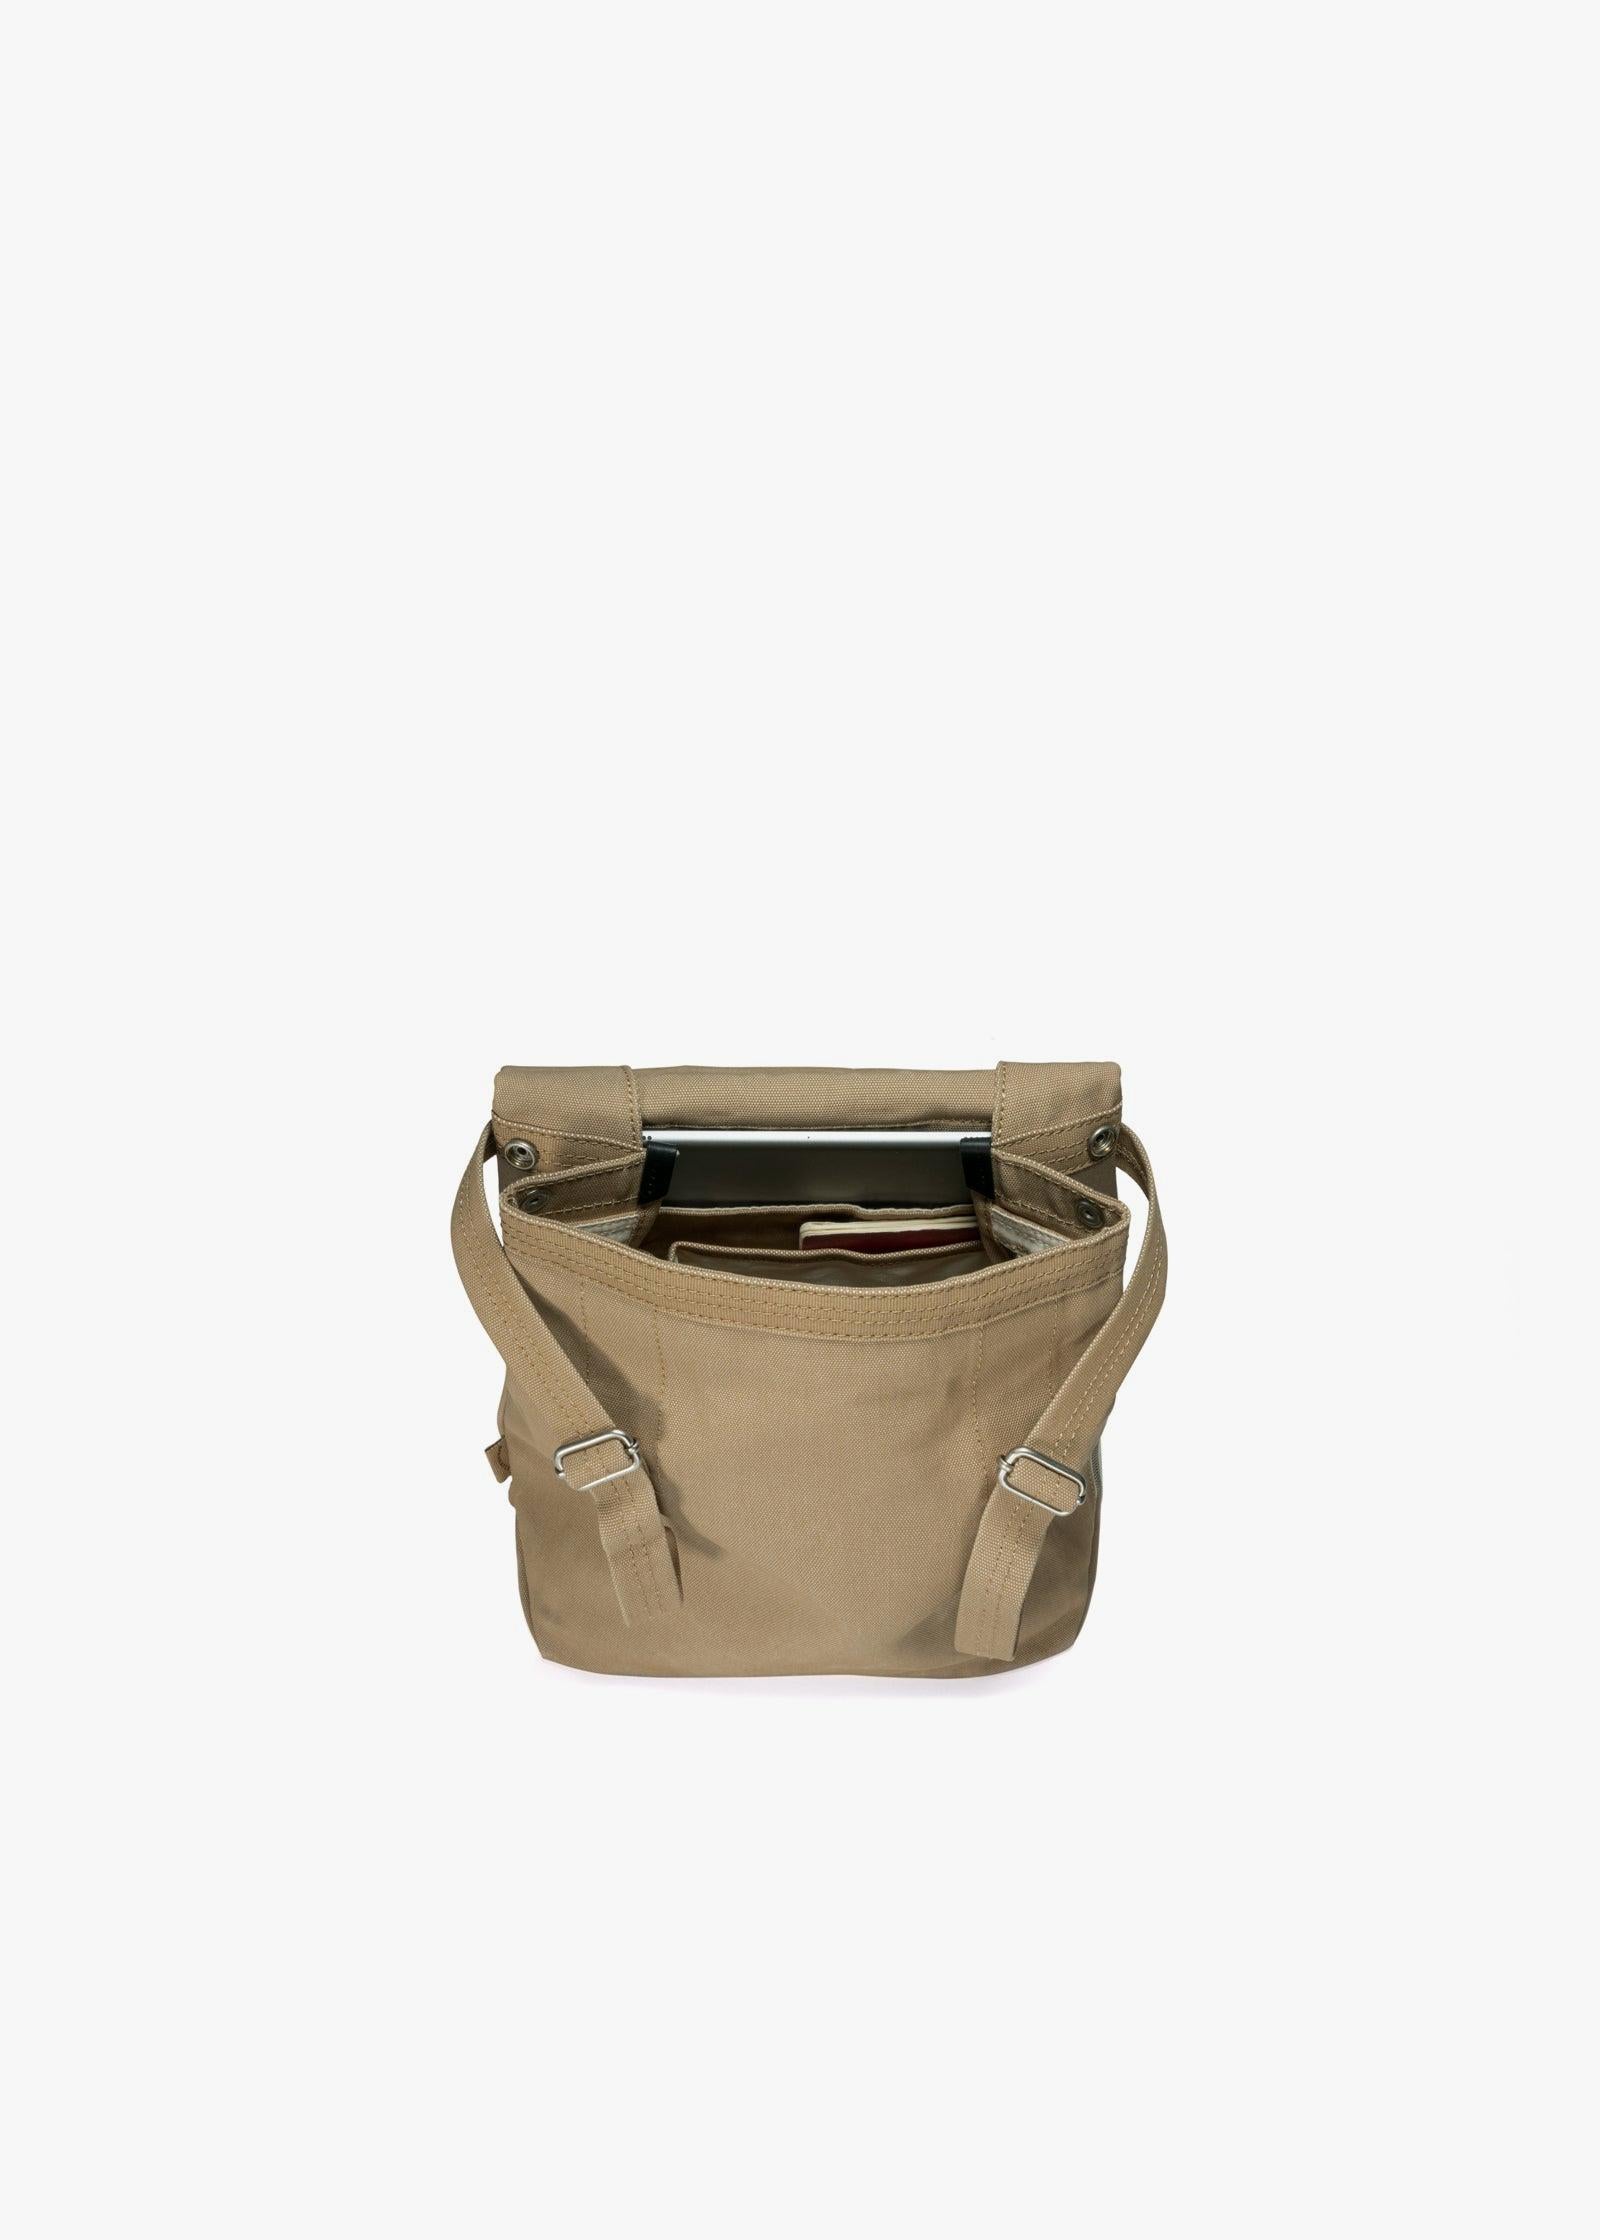 Flap Tote Small – Sand